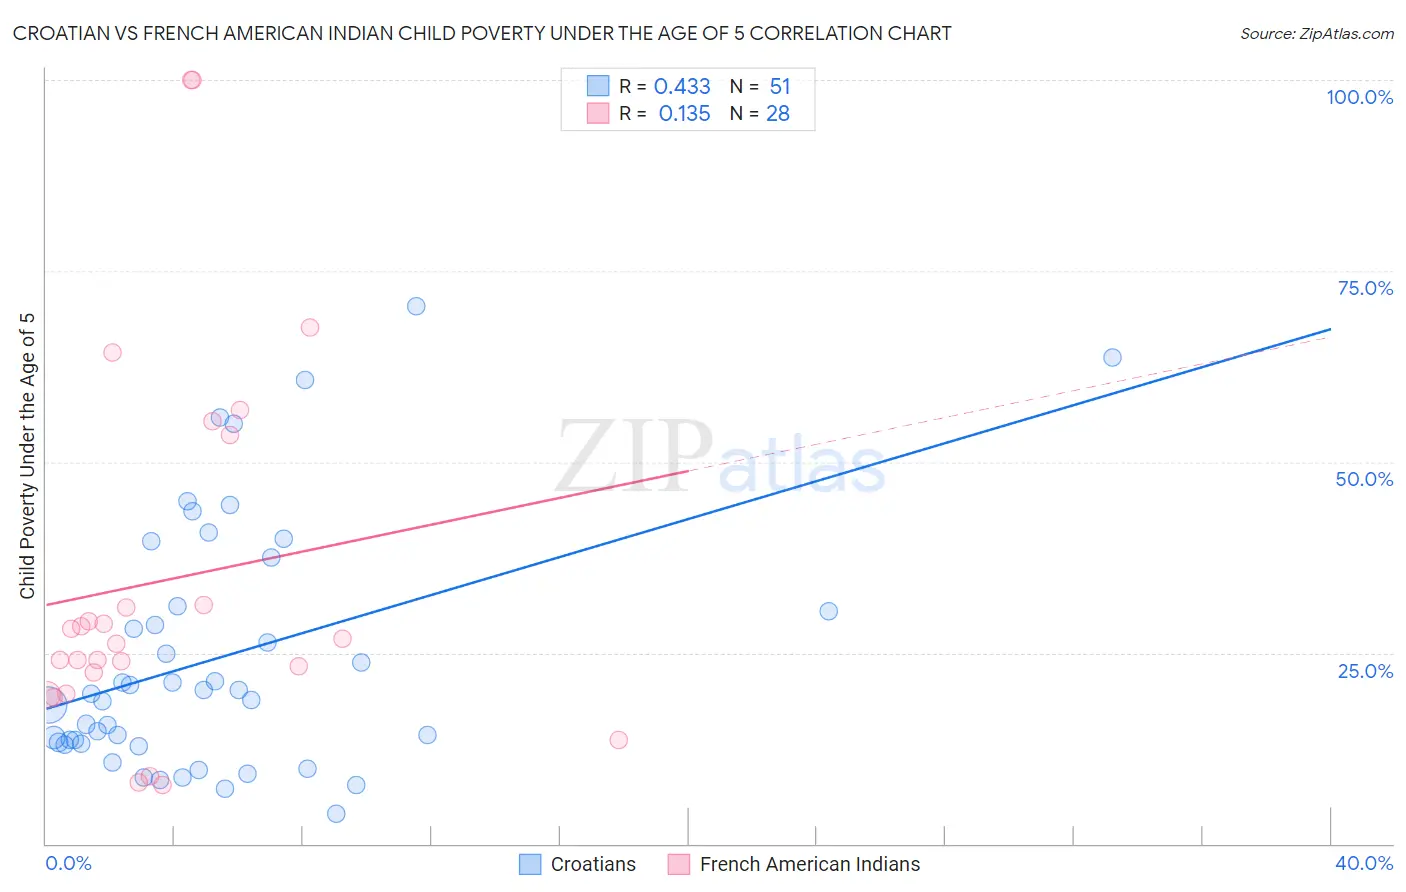 Croatian vs French American Indian Child Poverty Under the Age of 5